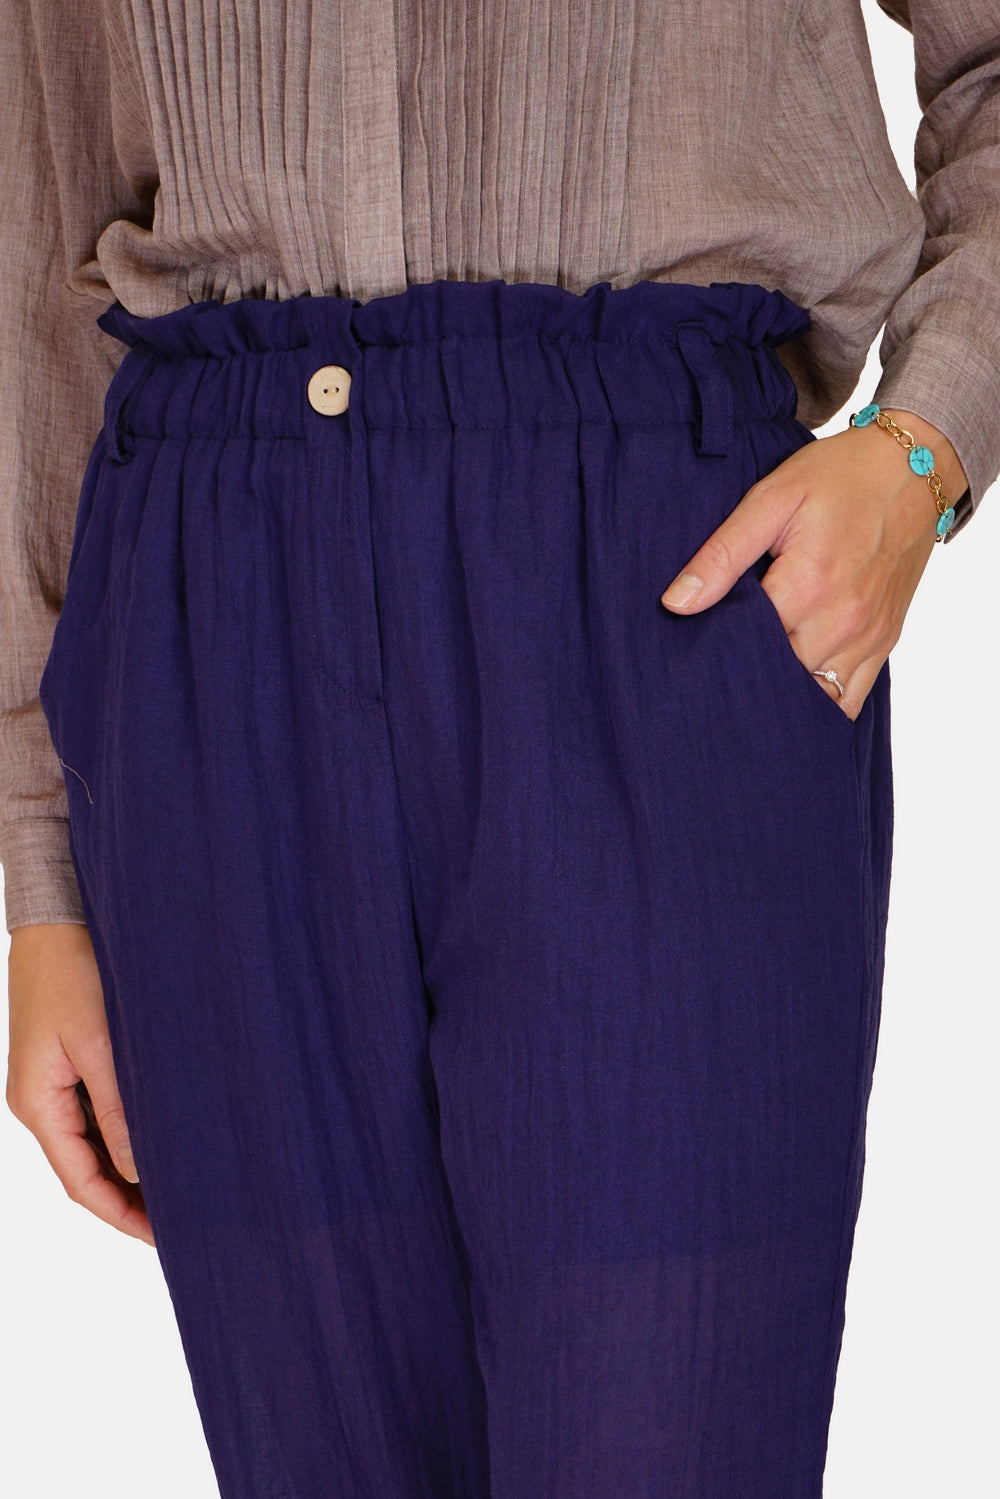 Trousers with pockets on the sides, buttons on the front, high waist